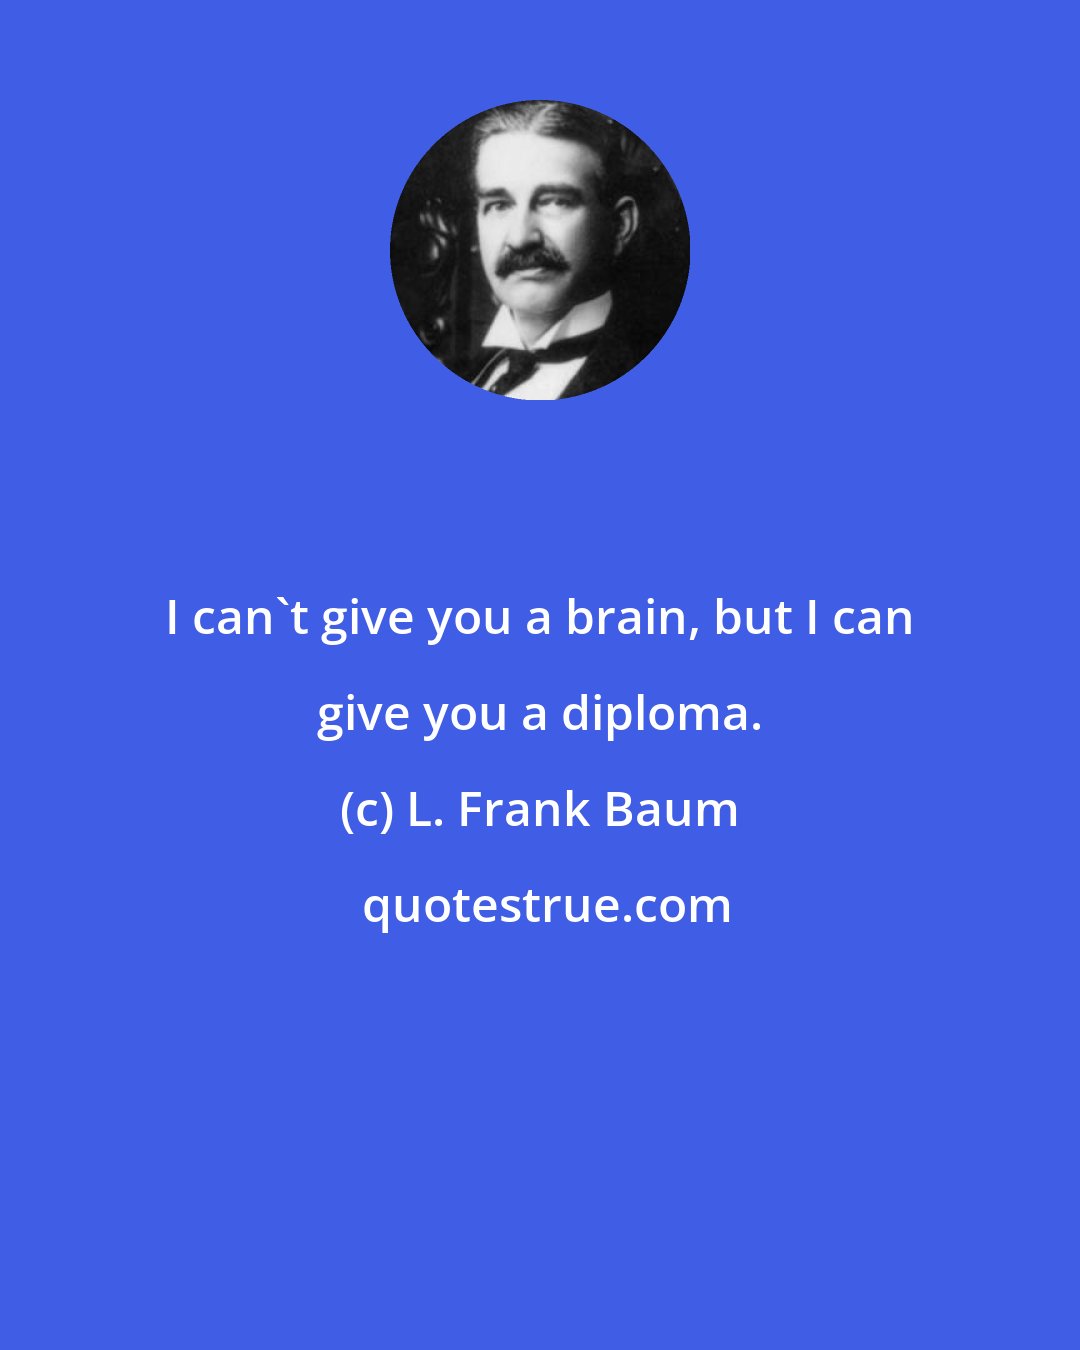 L. Frank Baum: I can't give you a brain, but I can give you a diploma.